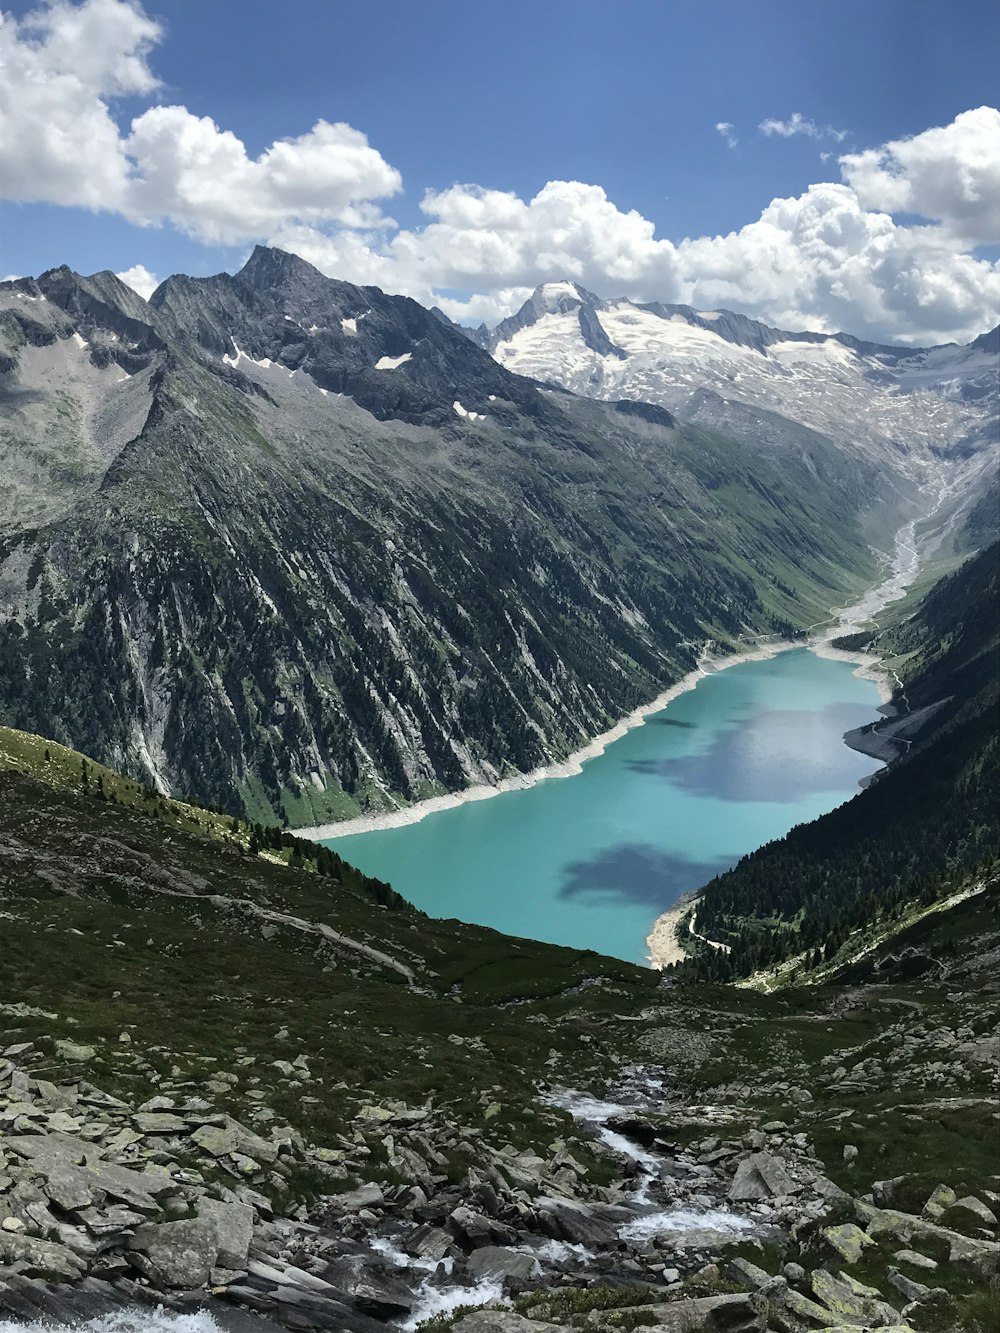 a view of a lake in the middle of a mountain range